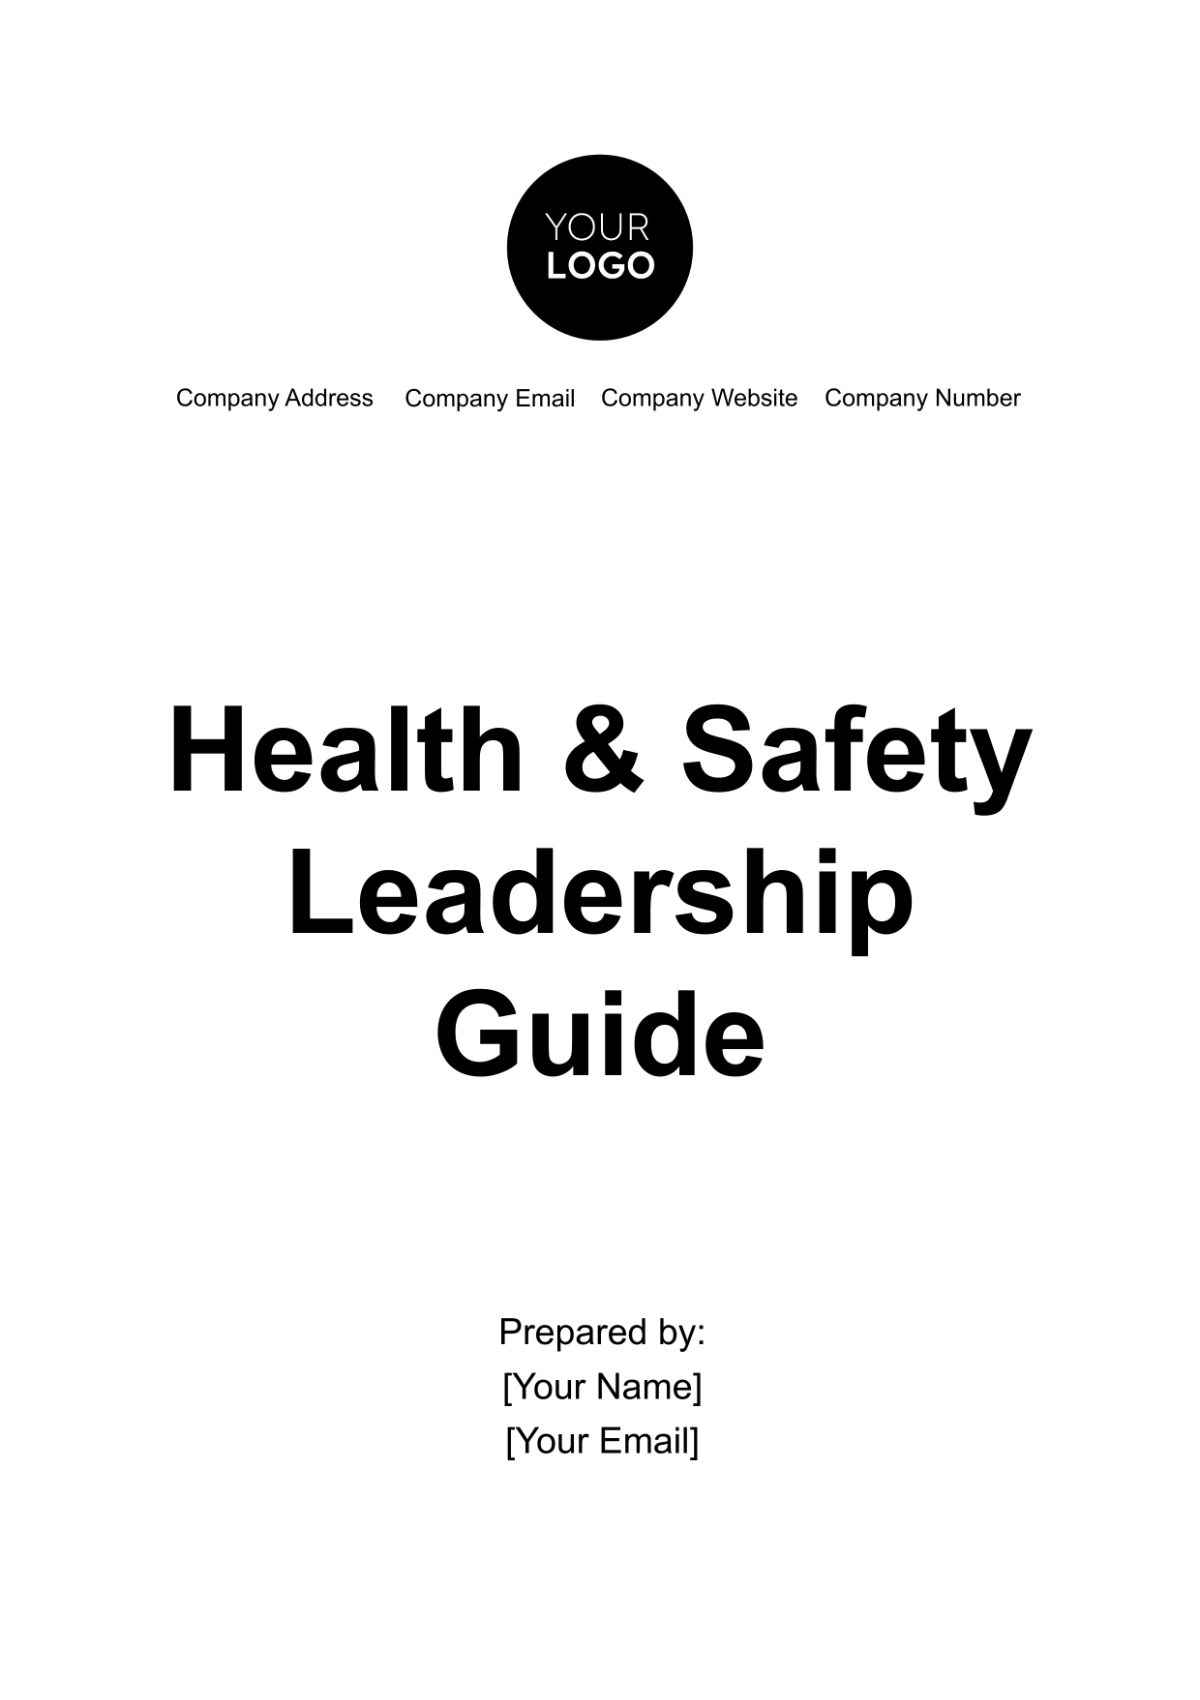 Health & Safety Leadership Guide Template